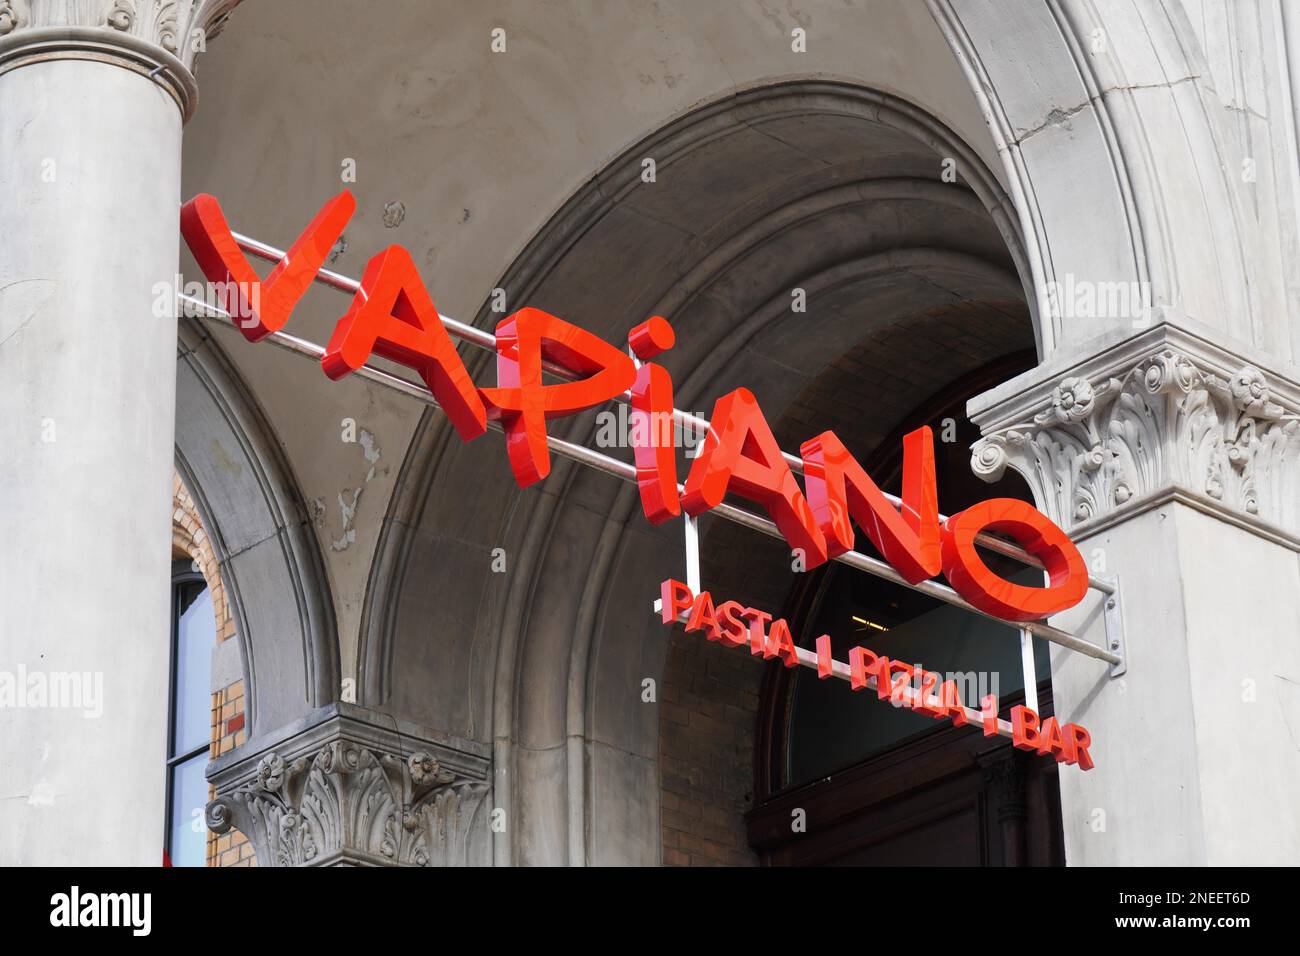 Hannover, Germany - March 2, 2020: Vapiano logo sign at local branch of german franchise restaurant chain serving italian food like pizza and pasta Stock Photo